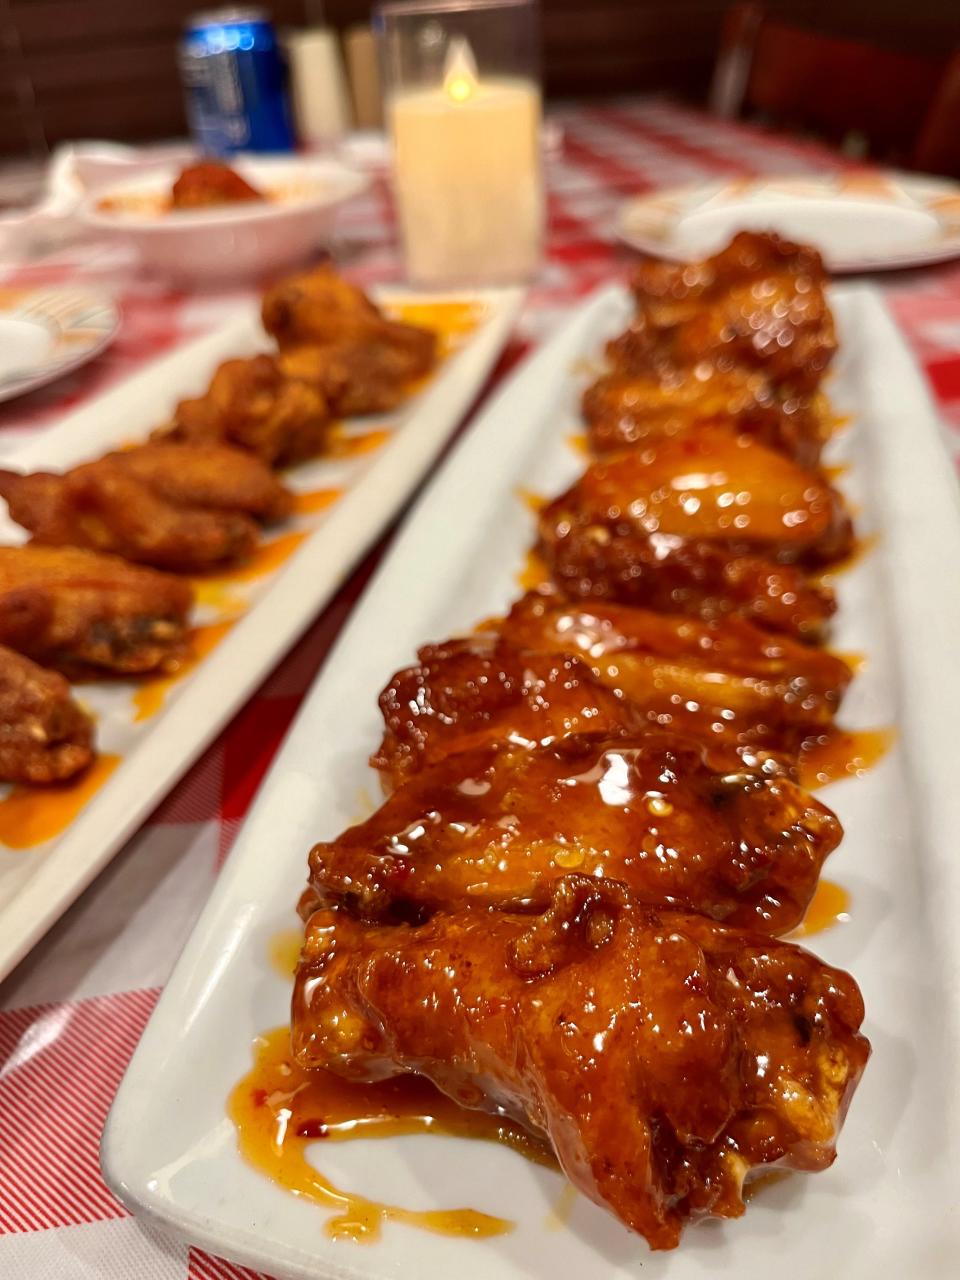 The wings at Matthew's Pizza Kitchen come in a variety of flavors, including pineapple teriyaki, bbq honey, sweet chili and boom boom sauce.